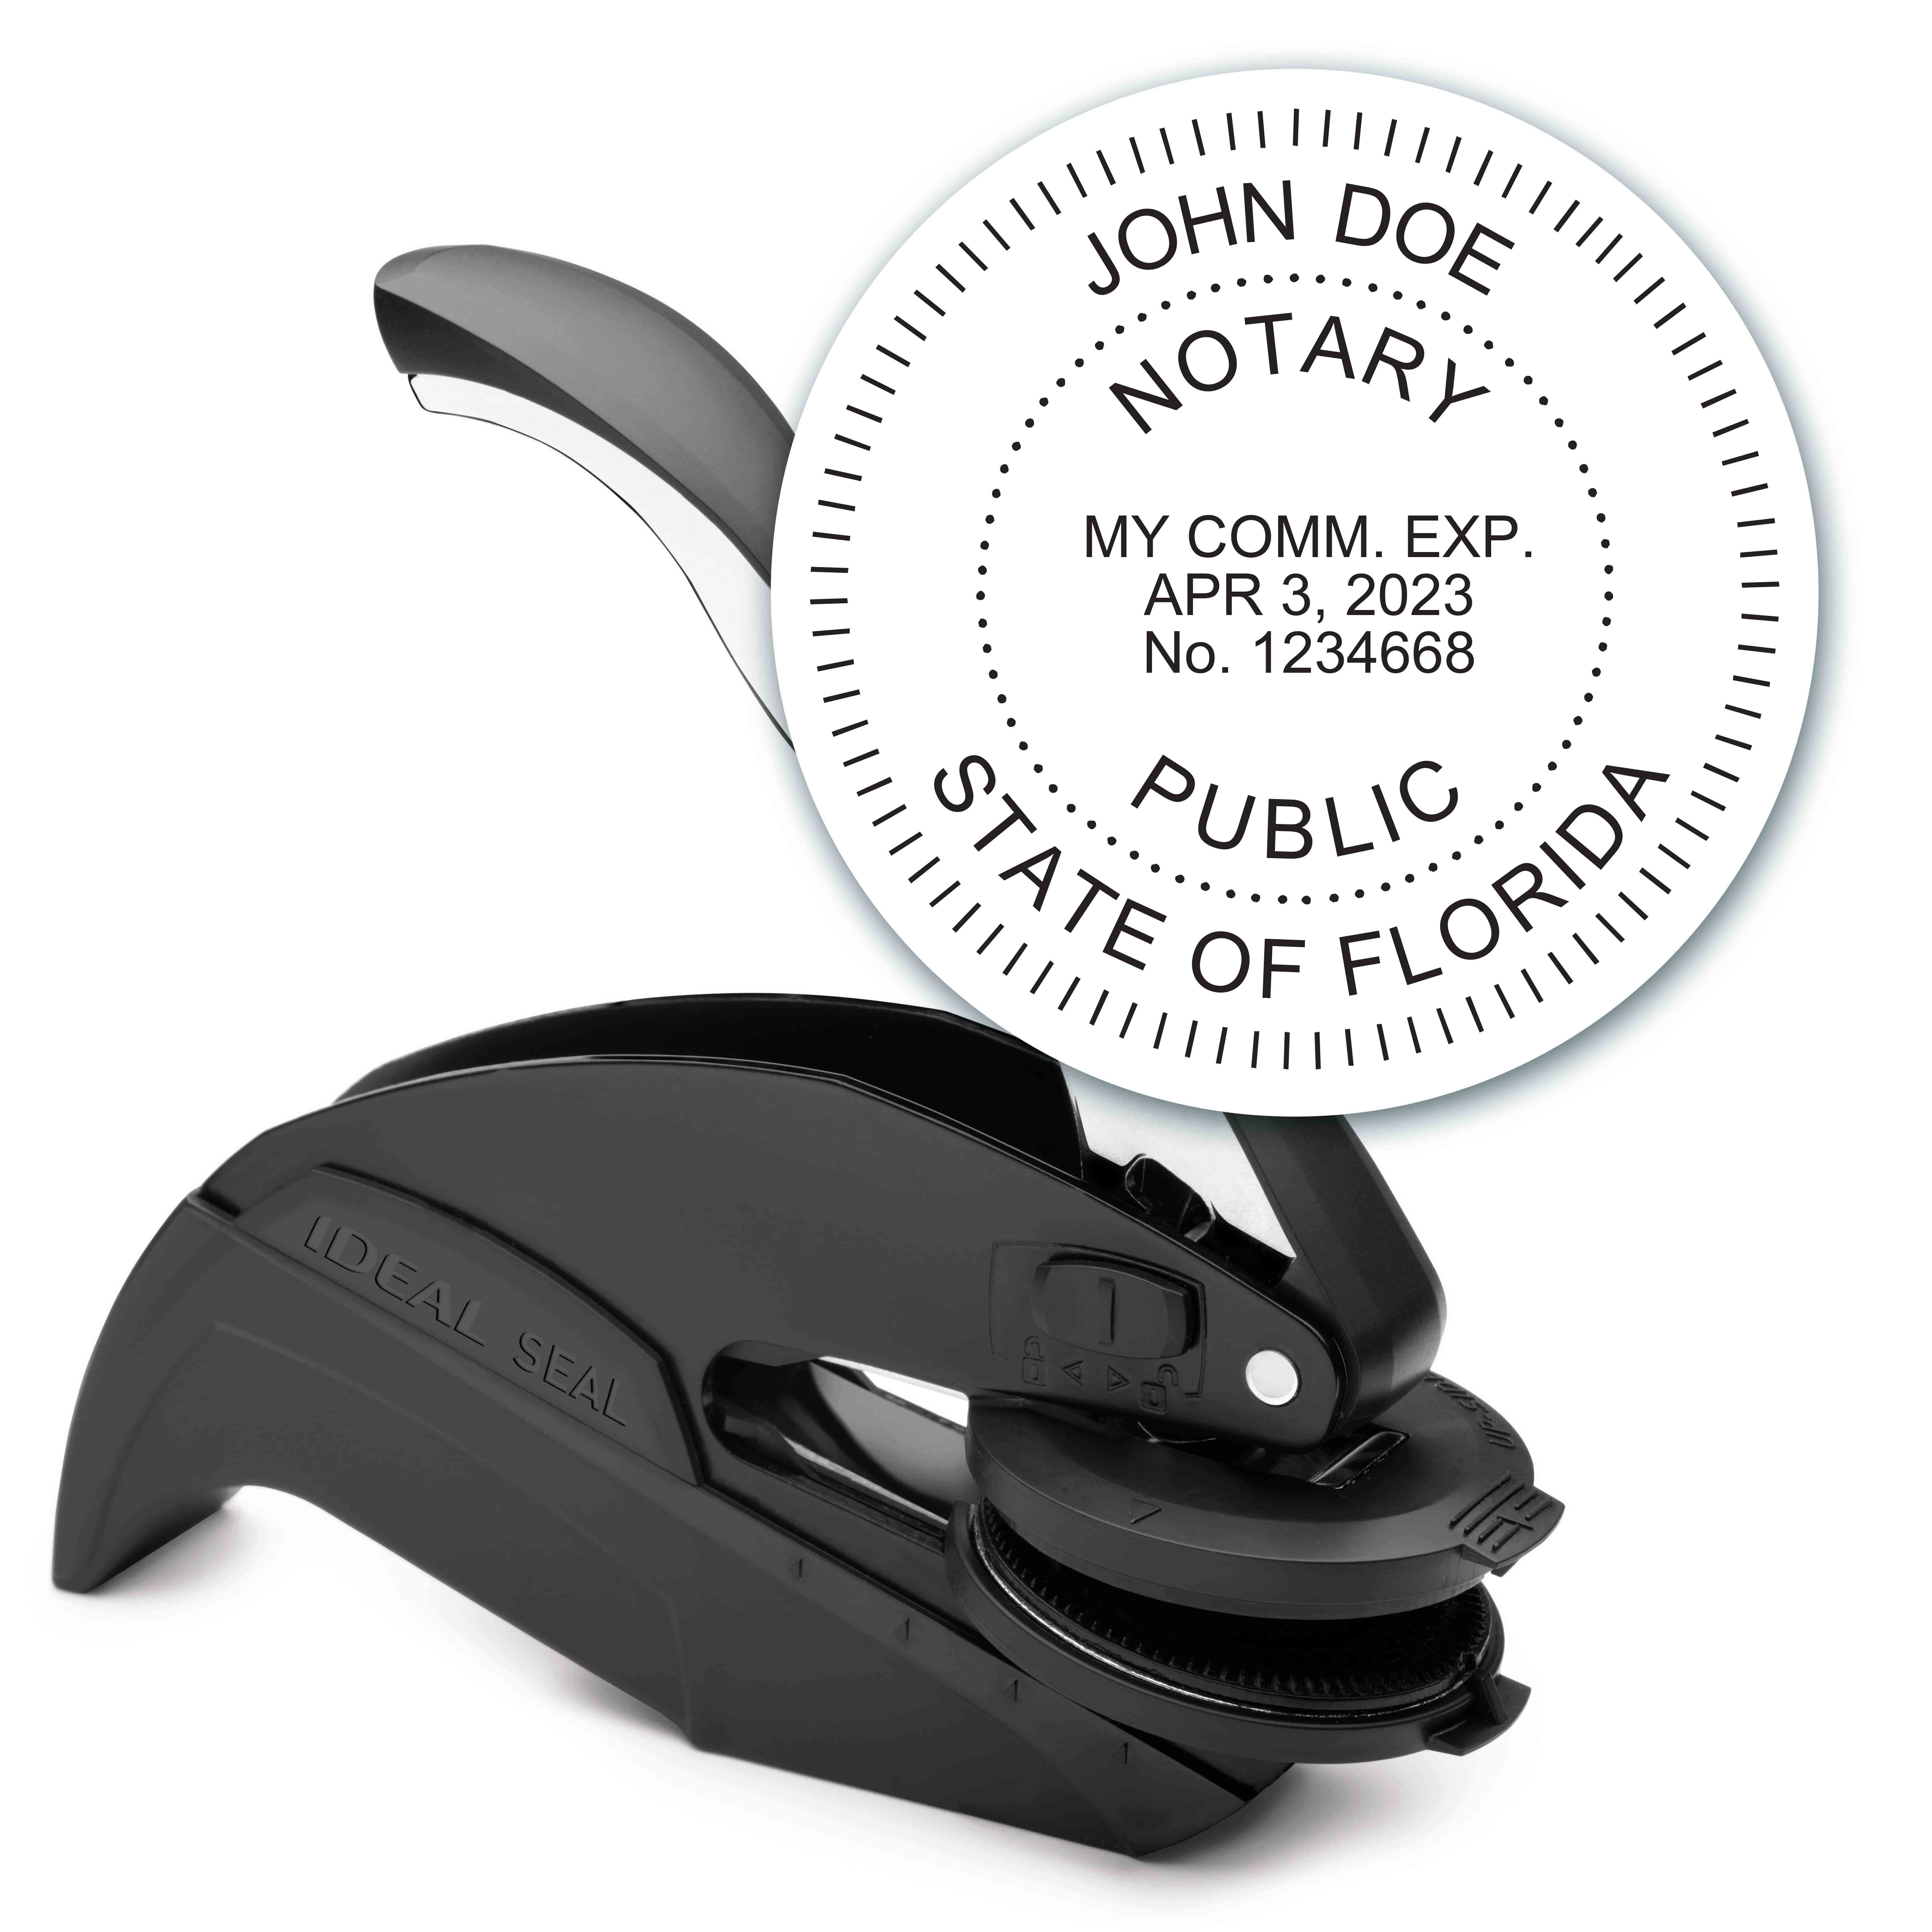 Notary Seal Round Embosser for Florida State - Includes Gold Burst Seal Labels (42 count)	